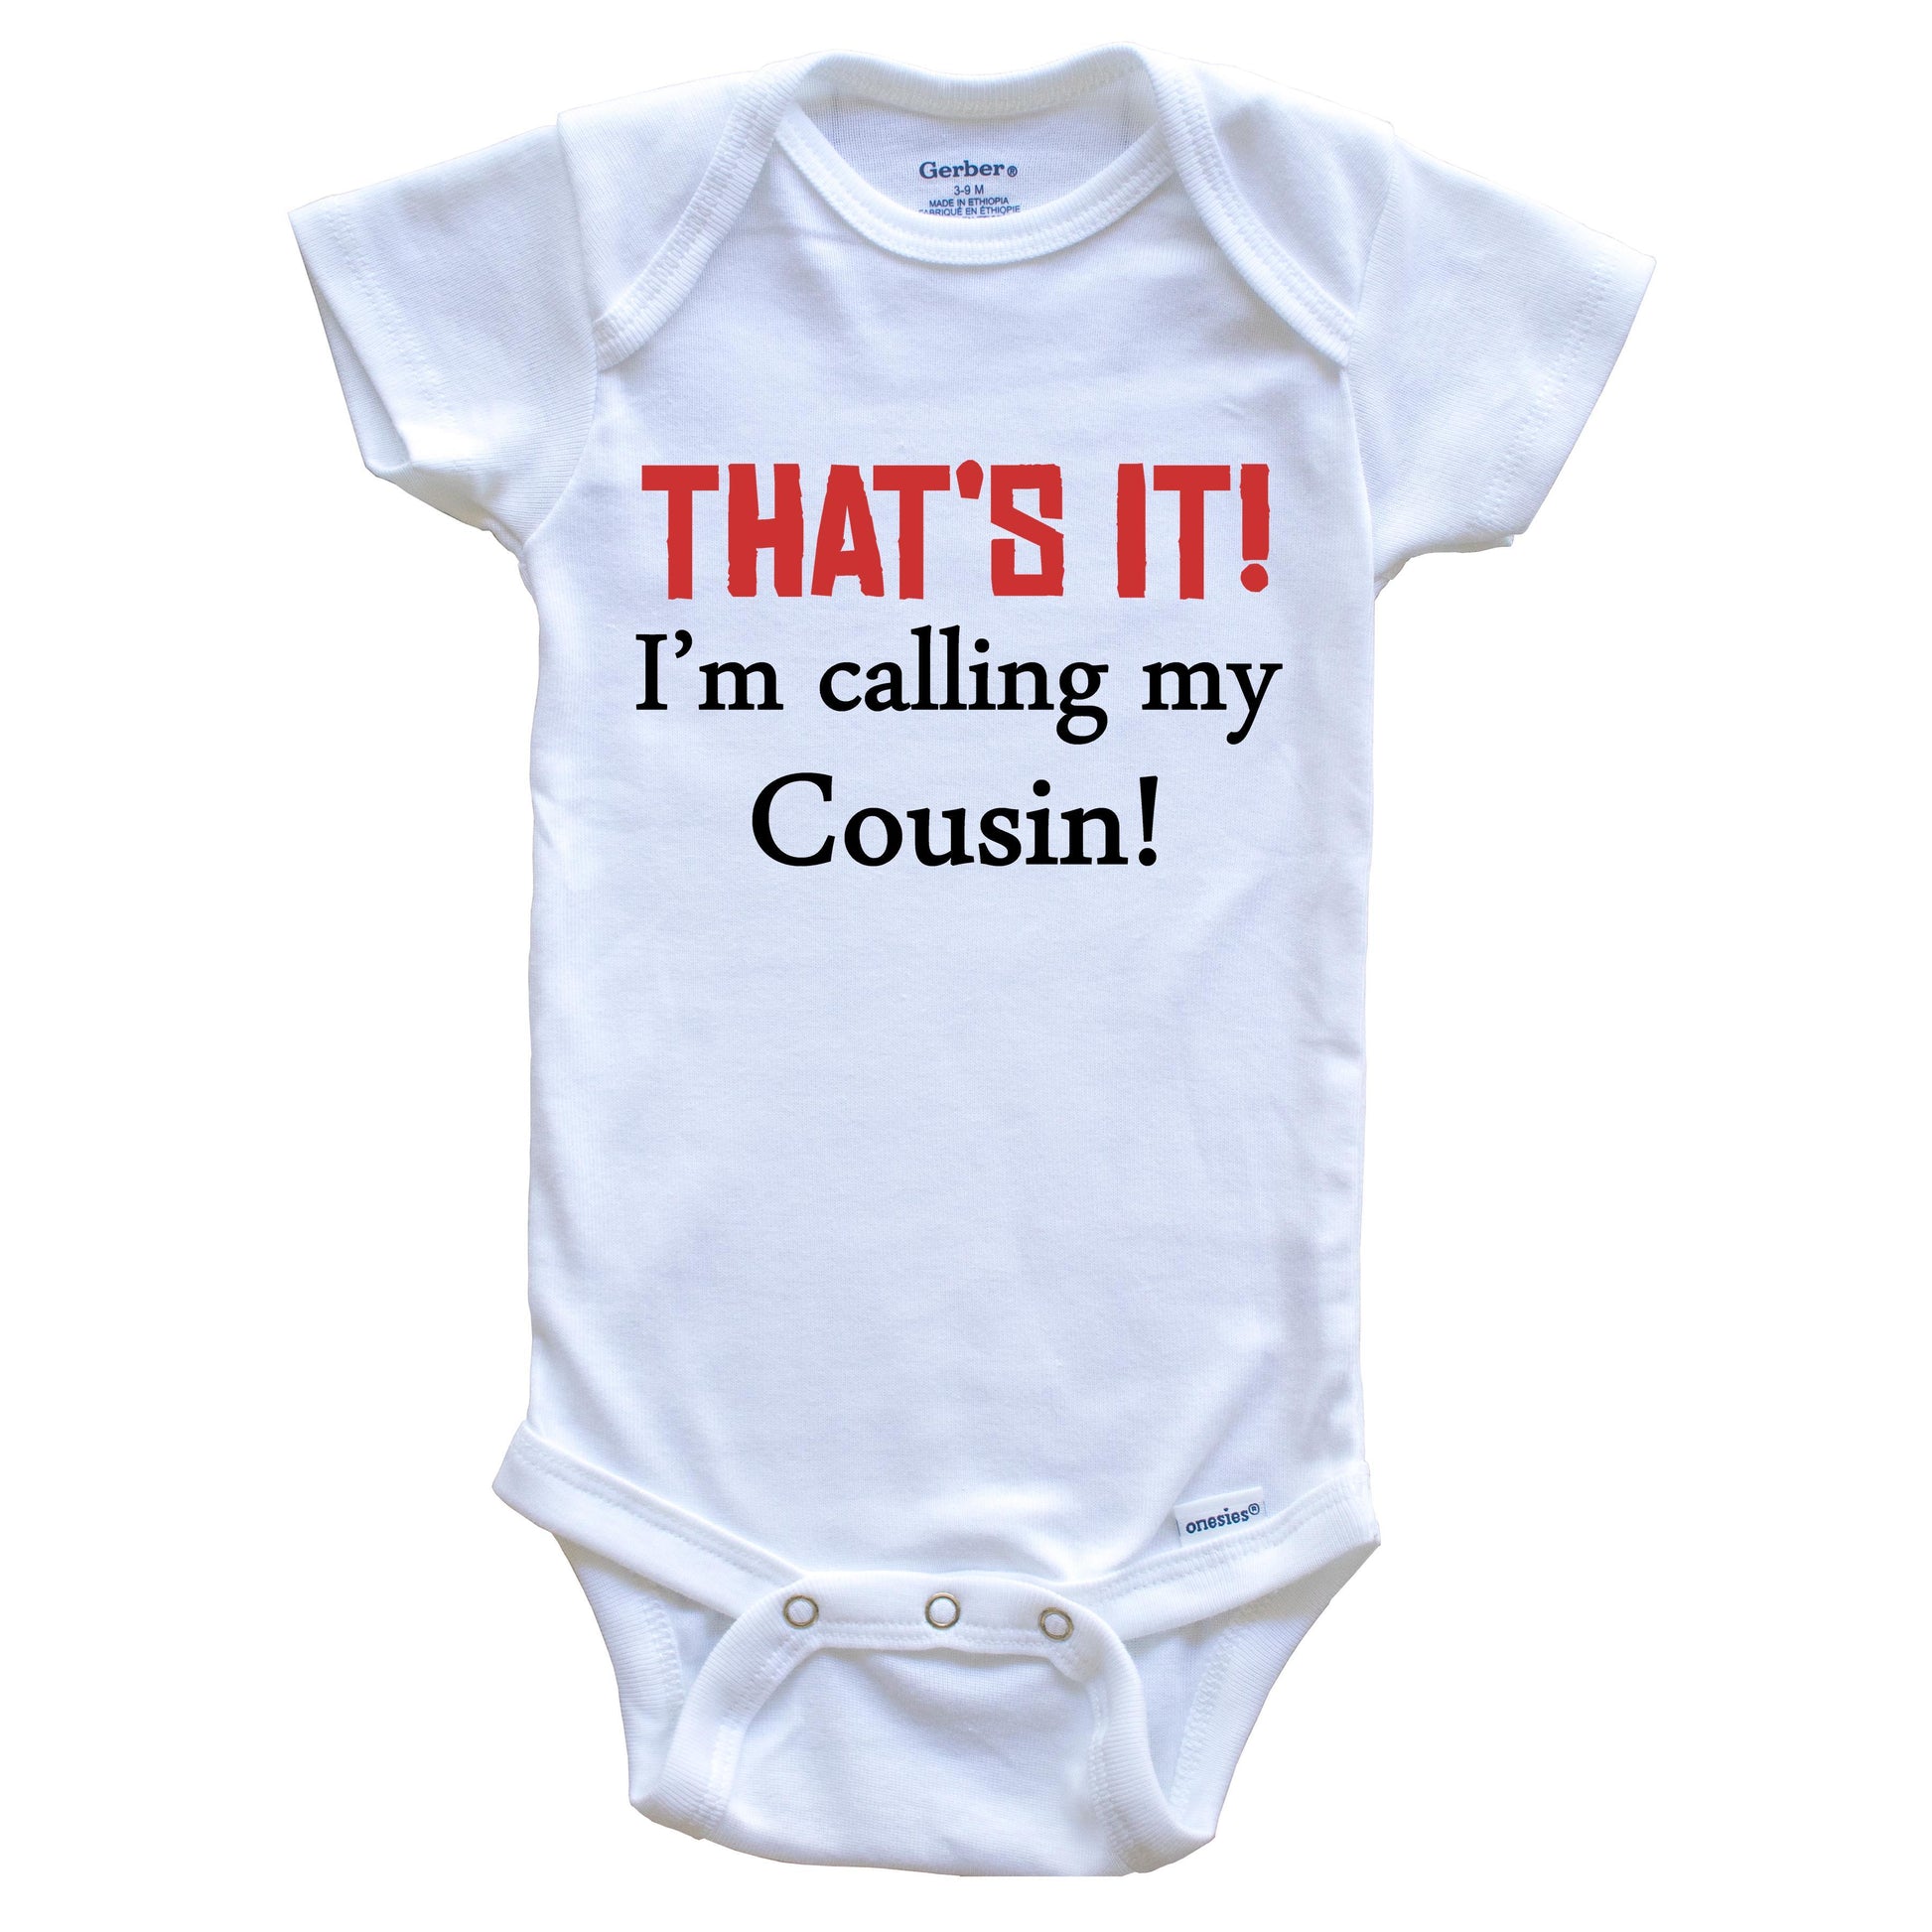 That's It! I'm Calling My Cousin! Funny Baby Onesie